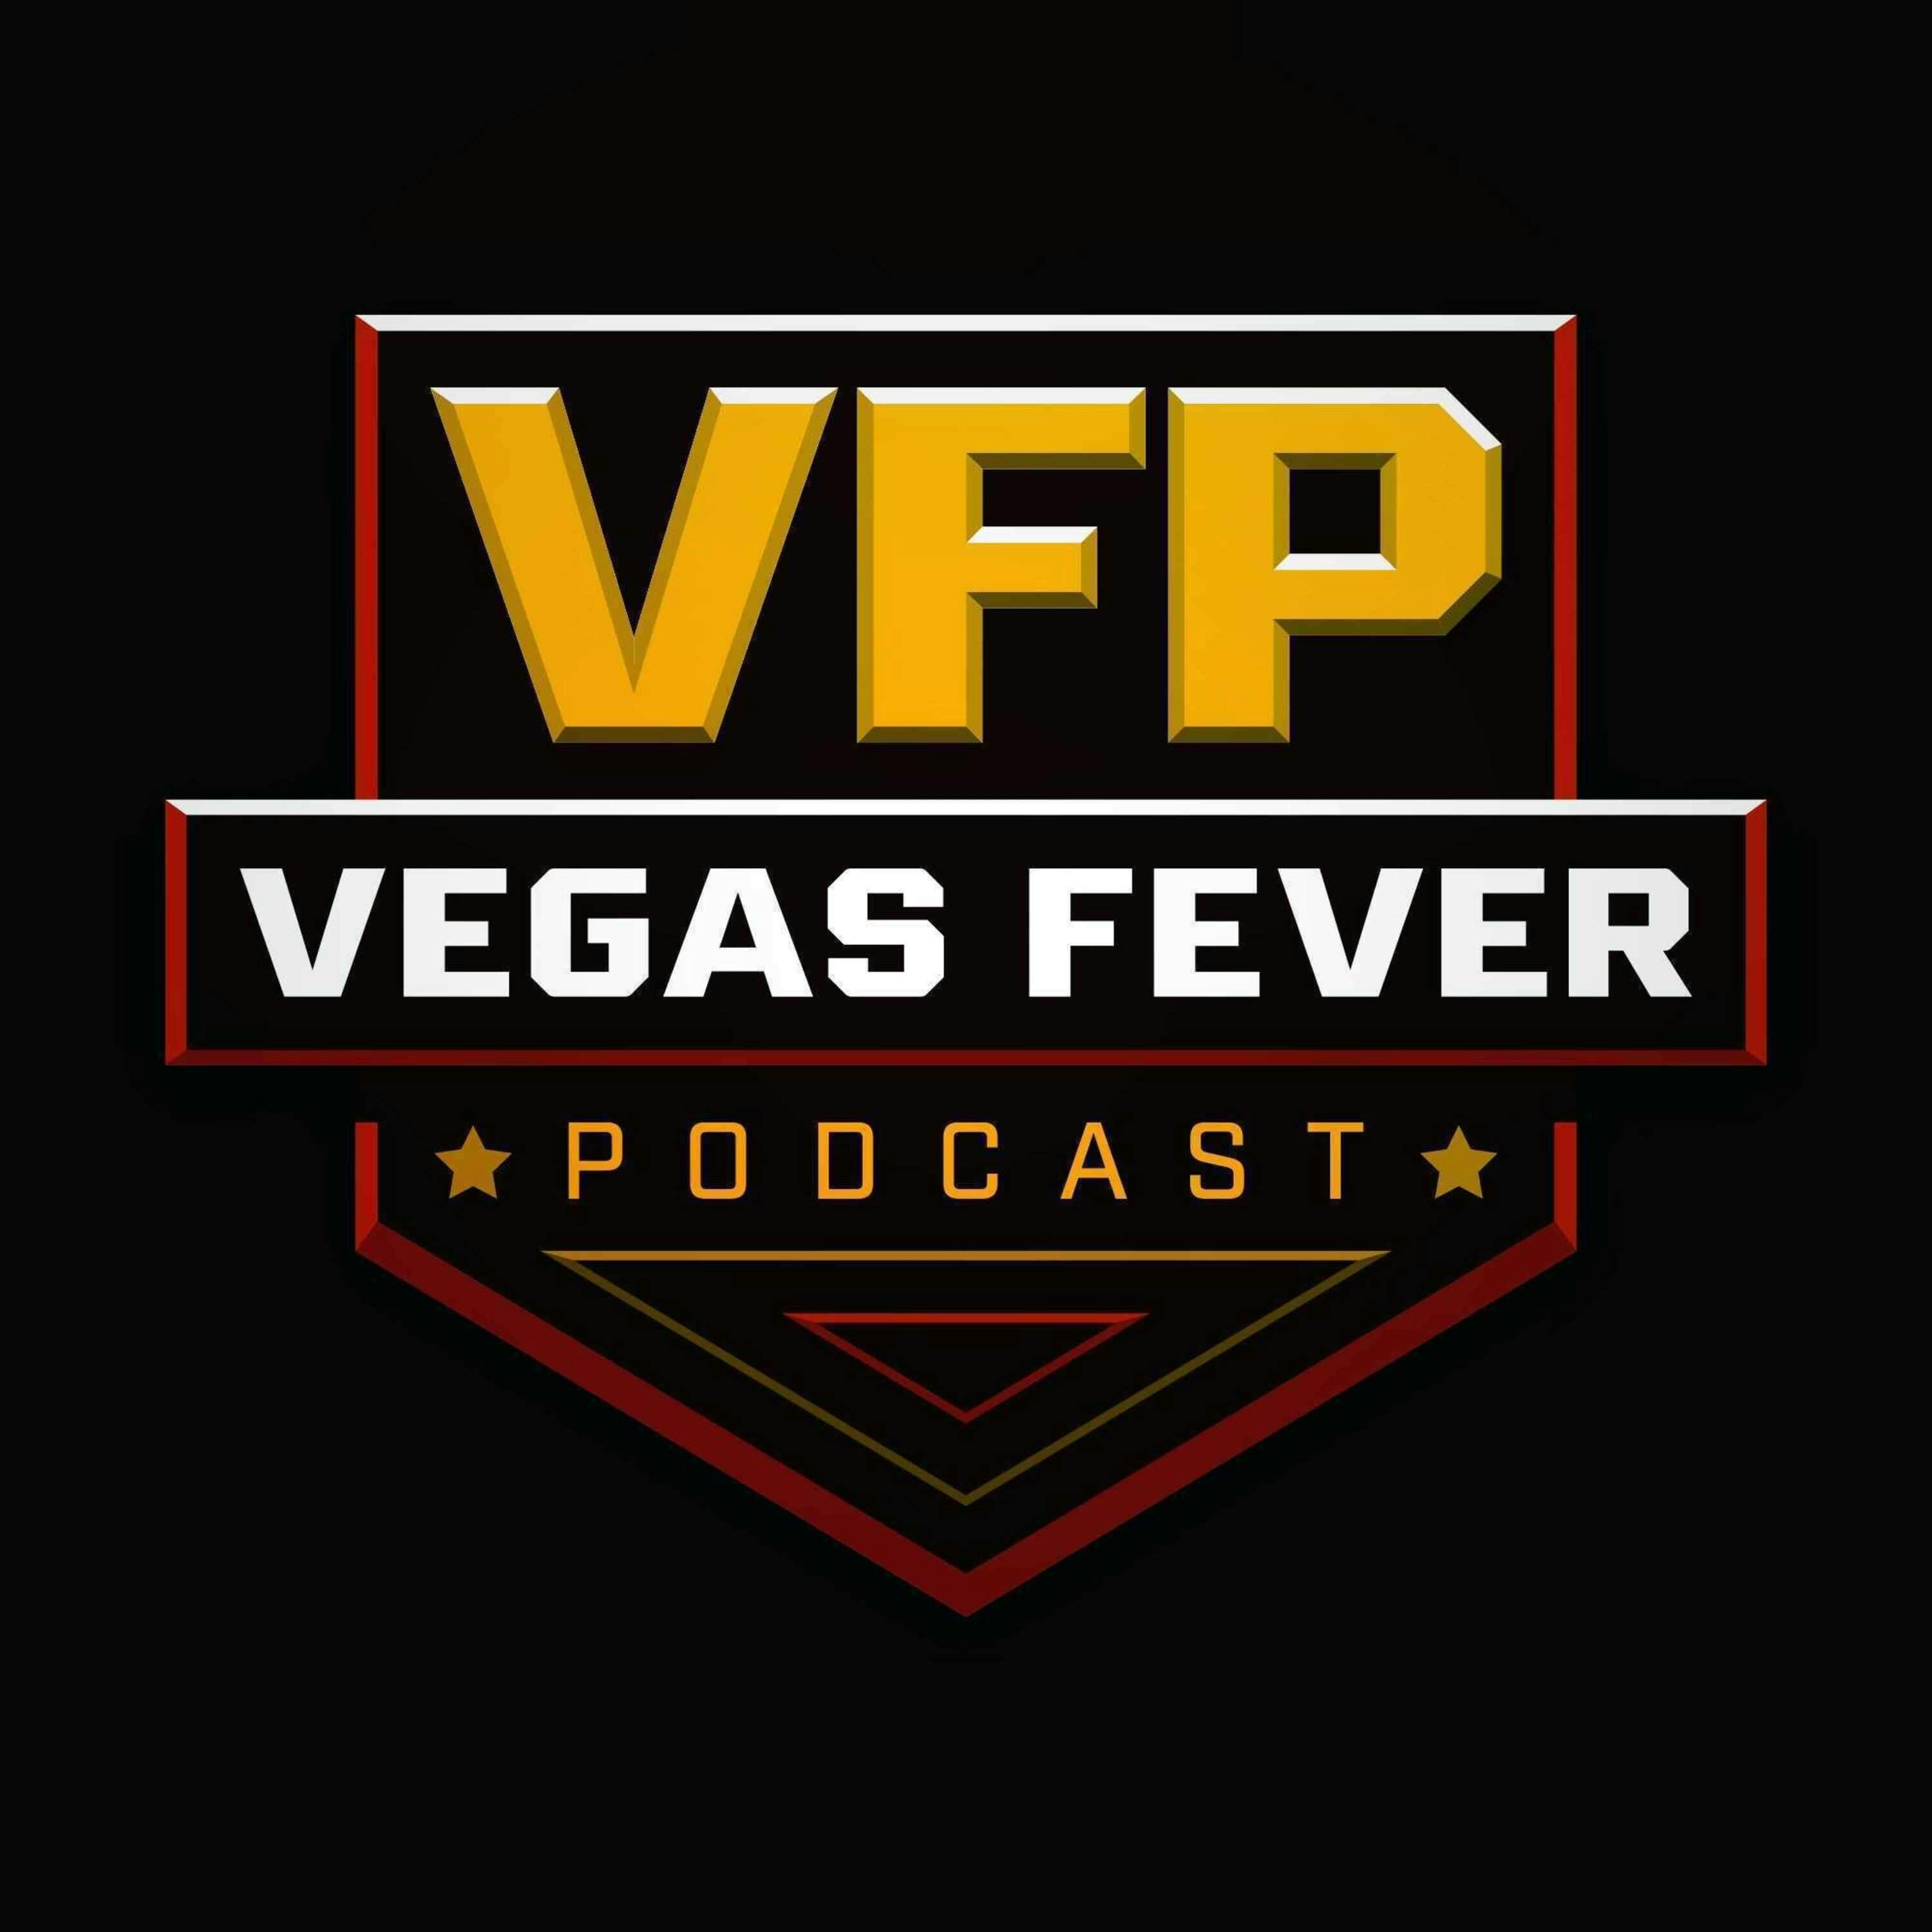 Episode 1 - New format !! talking unlv hoops, vgk and a little bit about us. Check it out!!